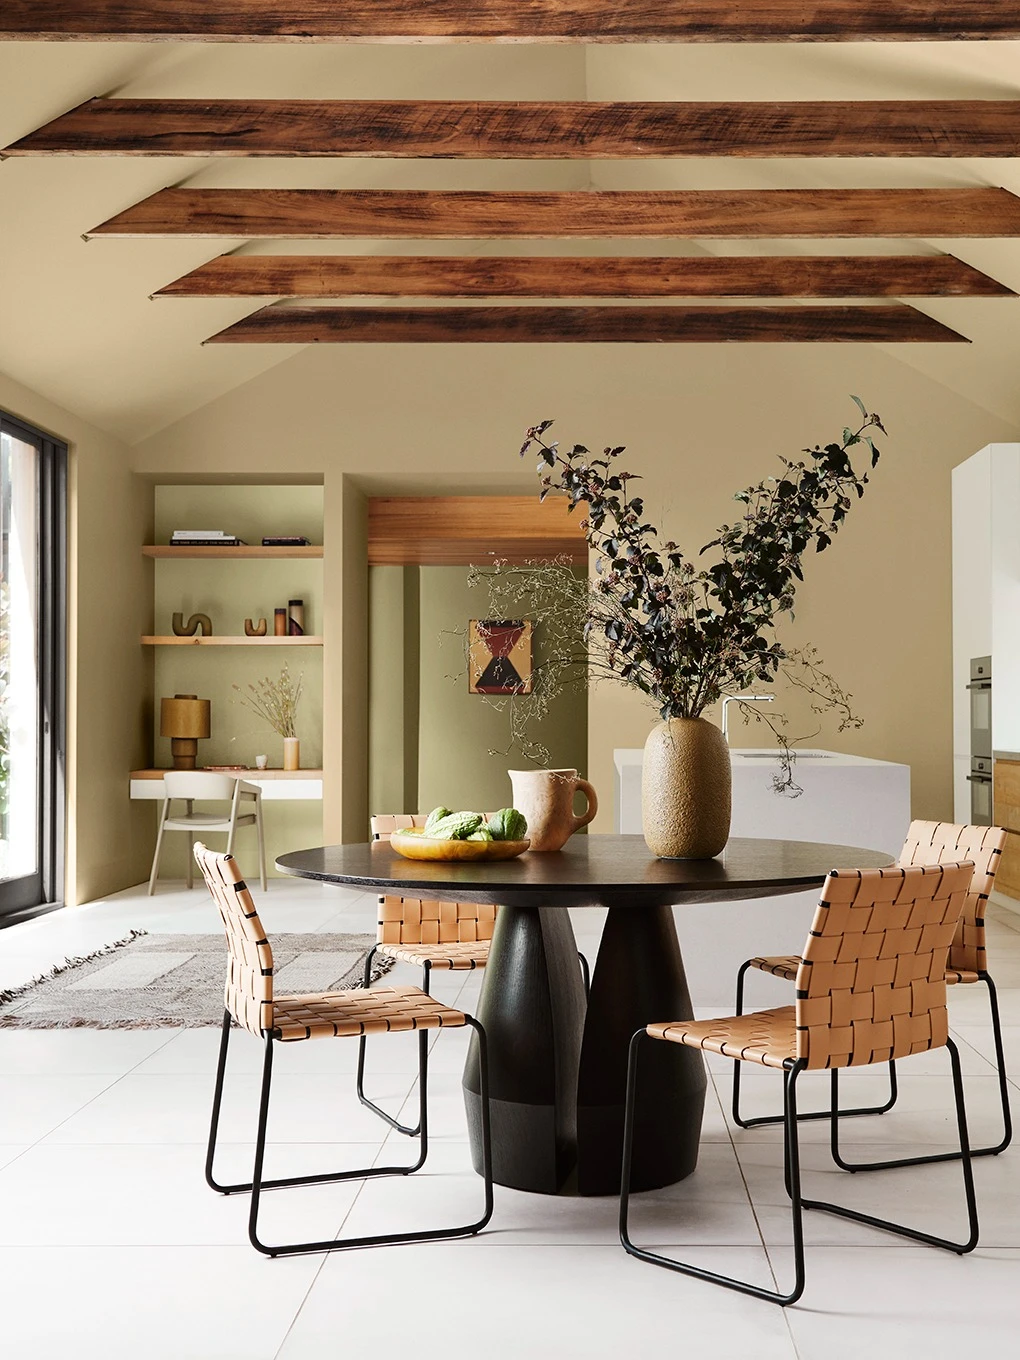 Soft green interior dining room with black round table and timber ceiling beams